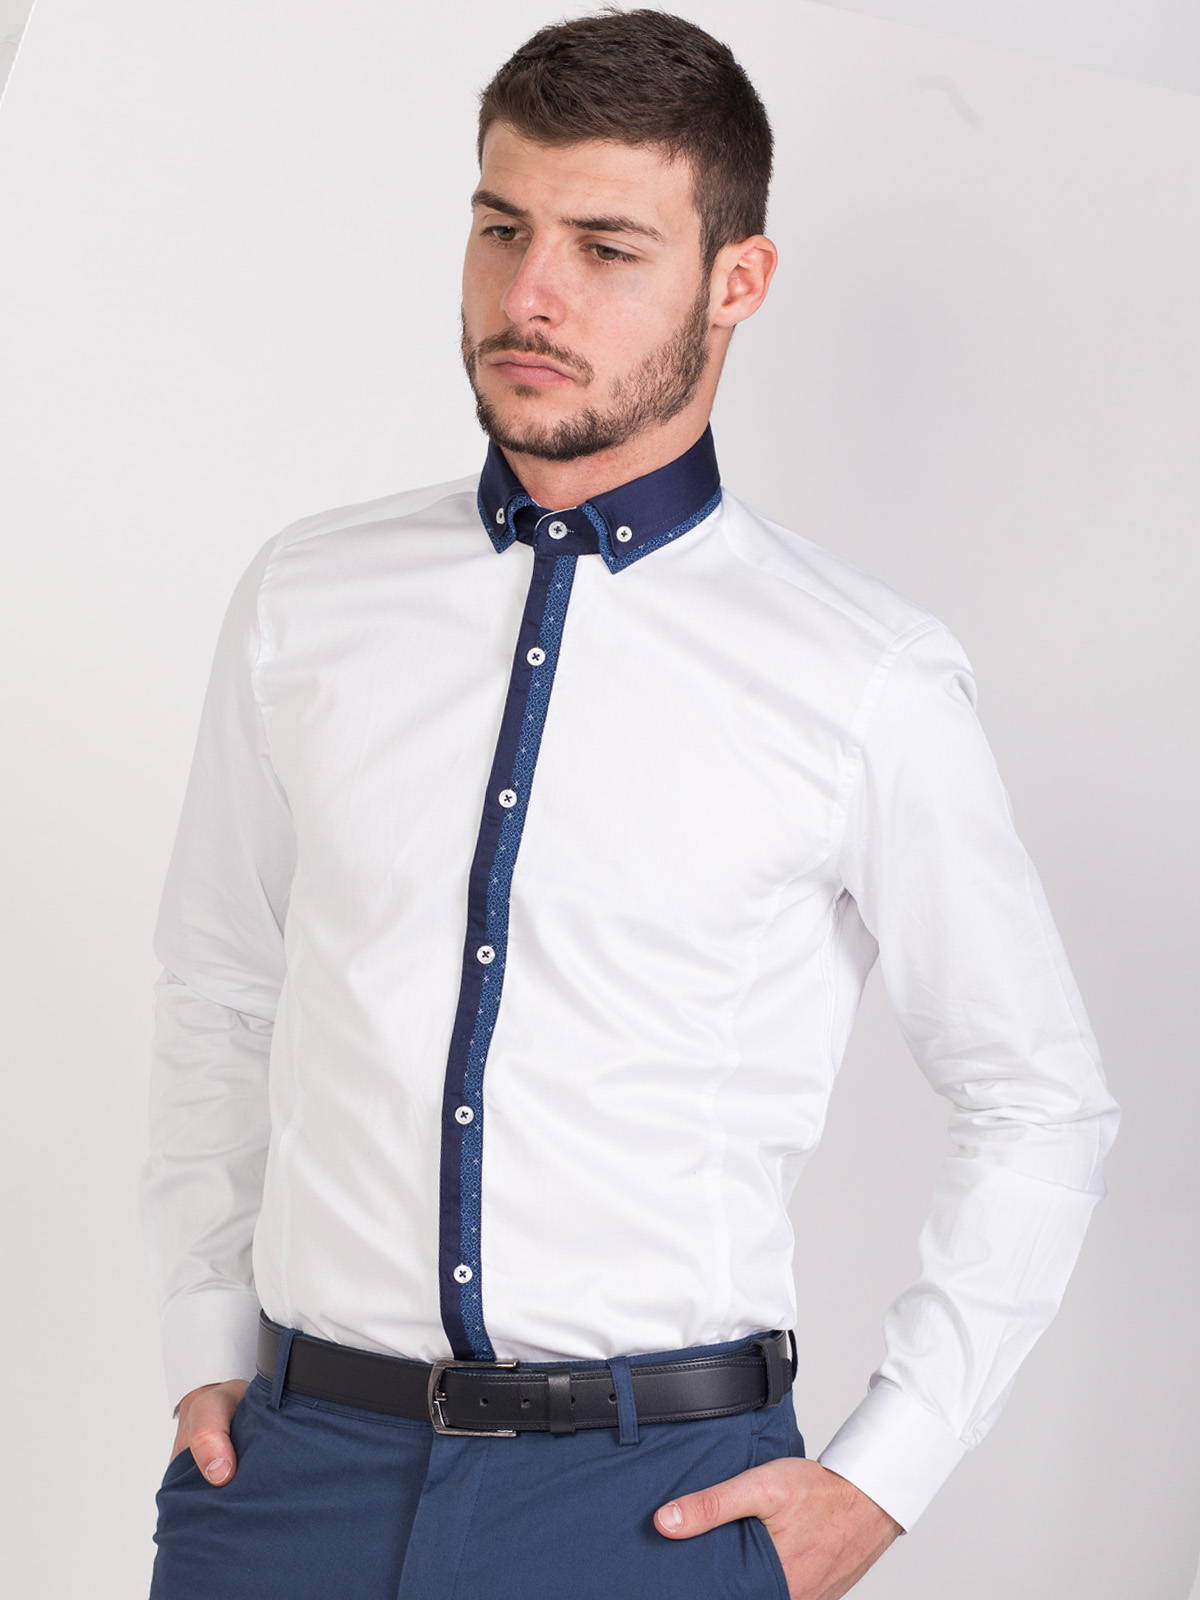 Shirt in white with dark blue elements - 21435 € 21.93 img3